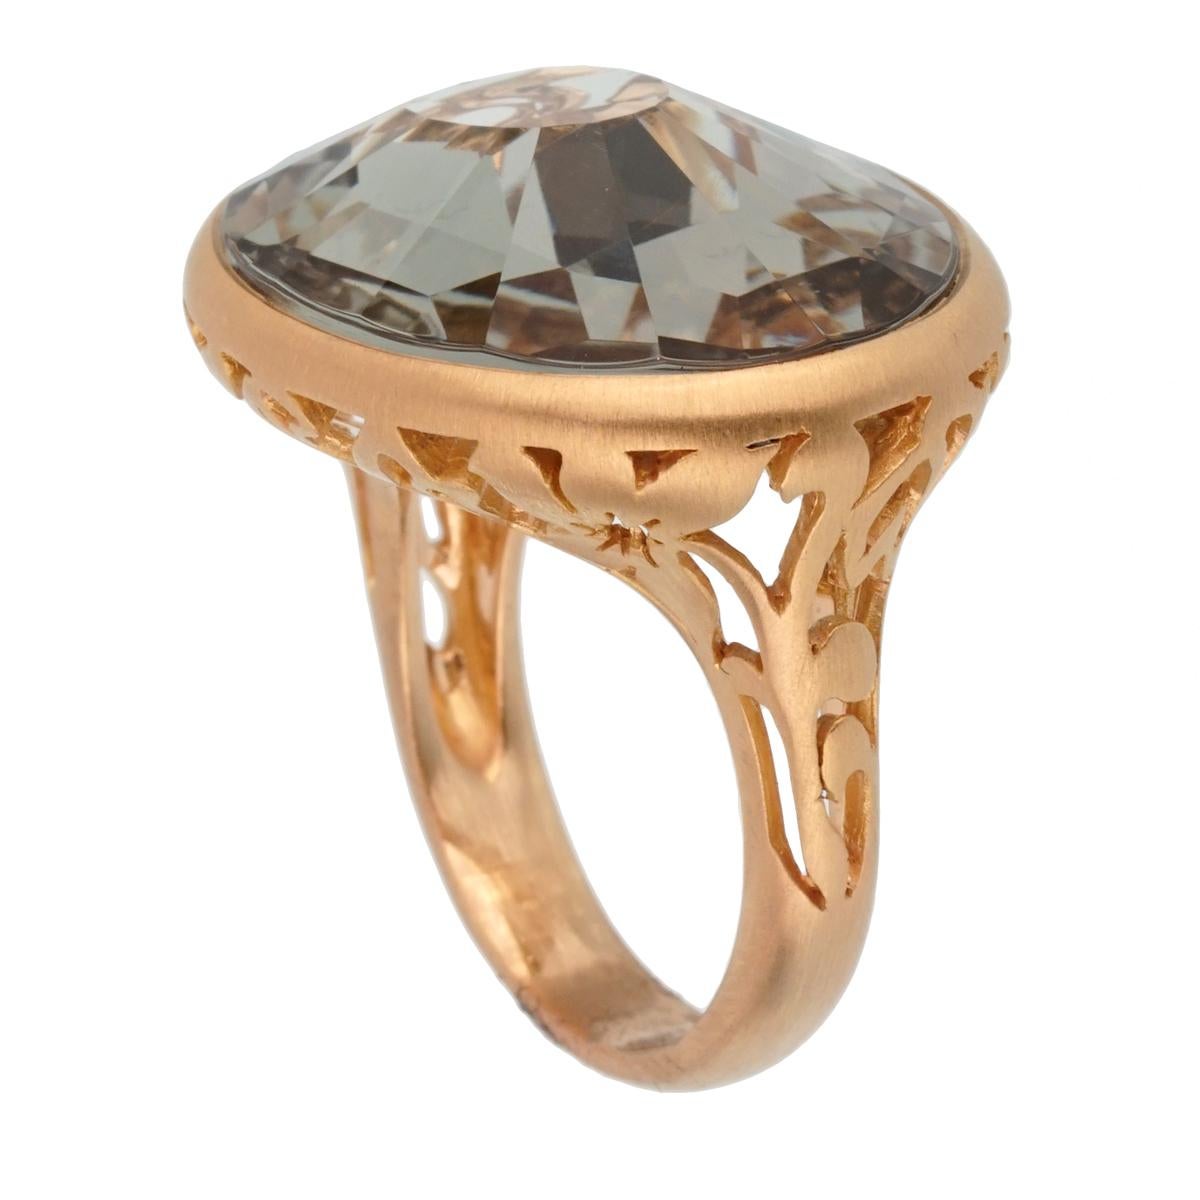 A chic brand new Pomellato cocktail ring showcasing a 10.19ct Green Prasiolite set in 18k rose gold. The ring measures a size 6 1/4 and can be resized

Pomellato Retail: $5500
Sku: 2438